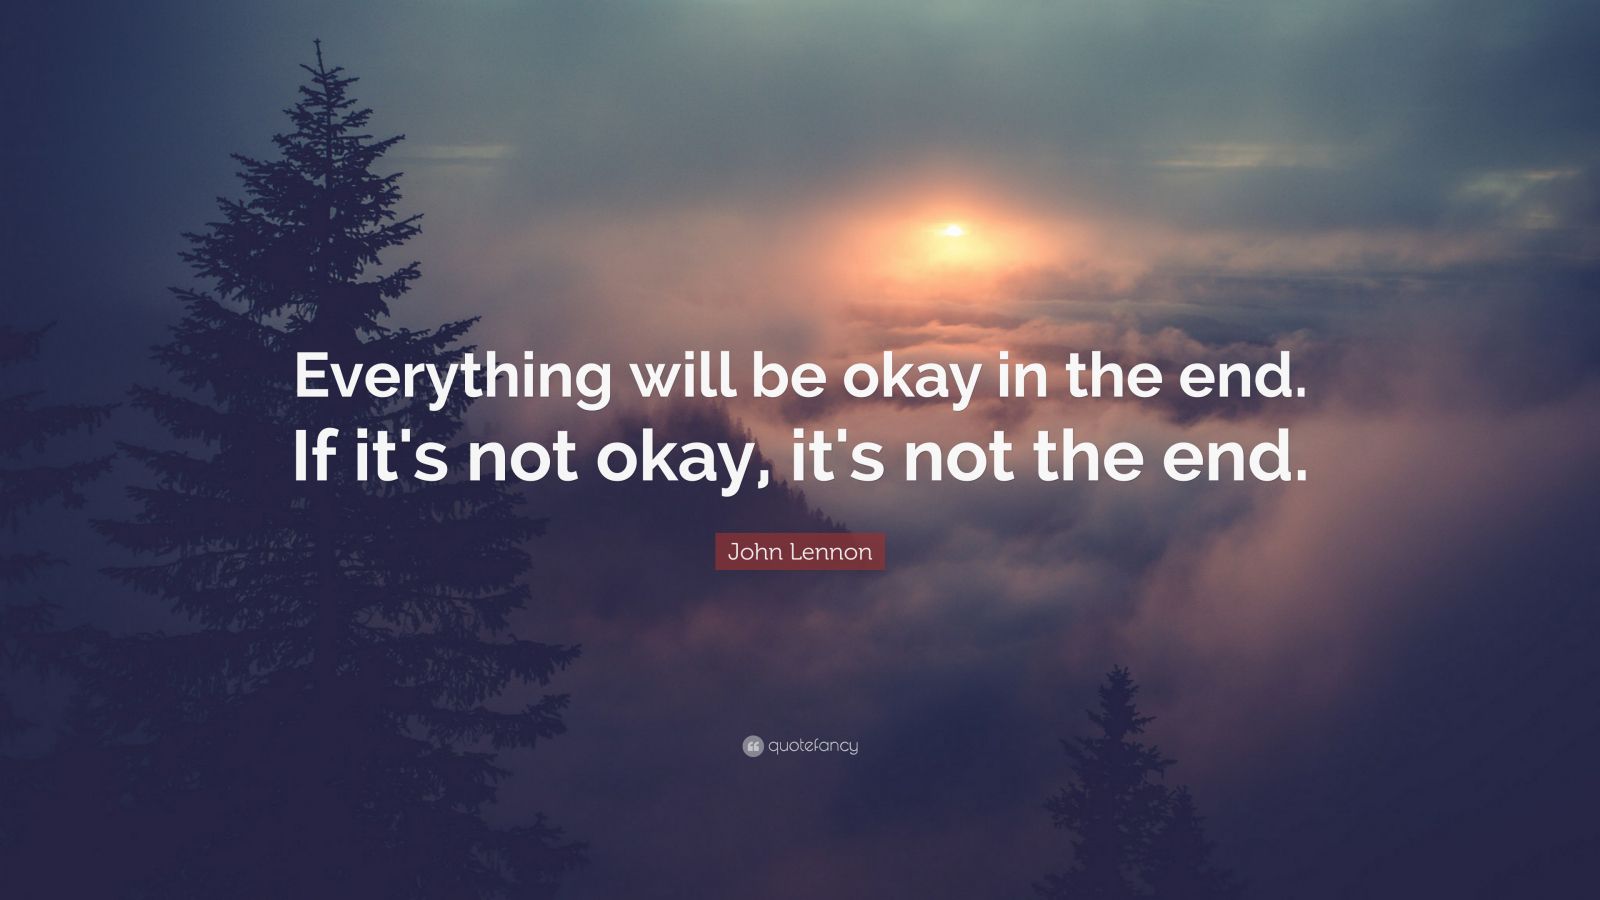 John Lennon Quotes 100 Wallpapers Quotefancy